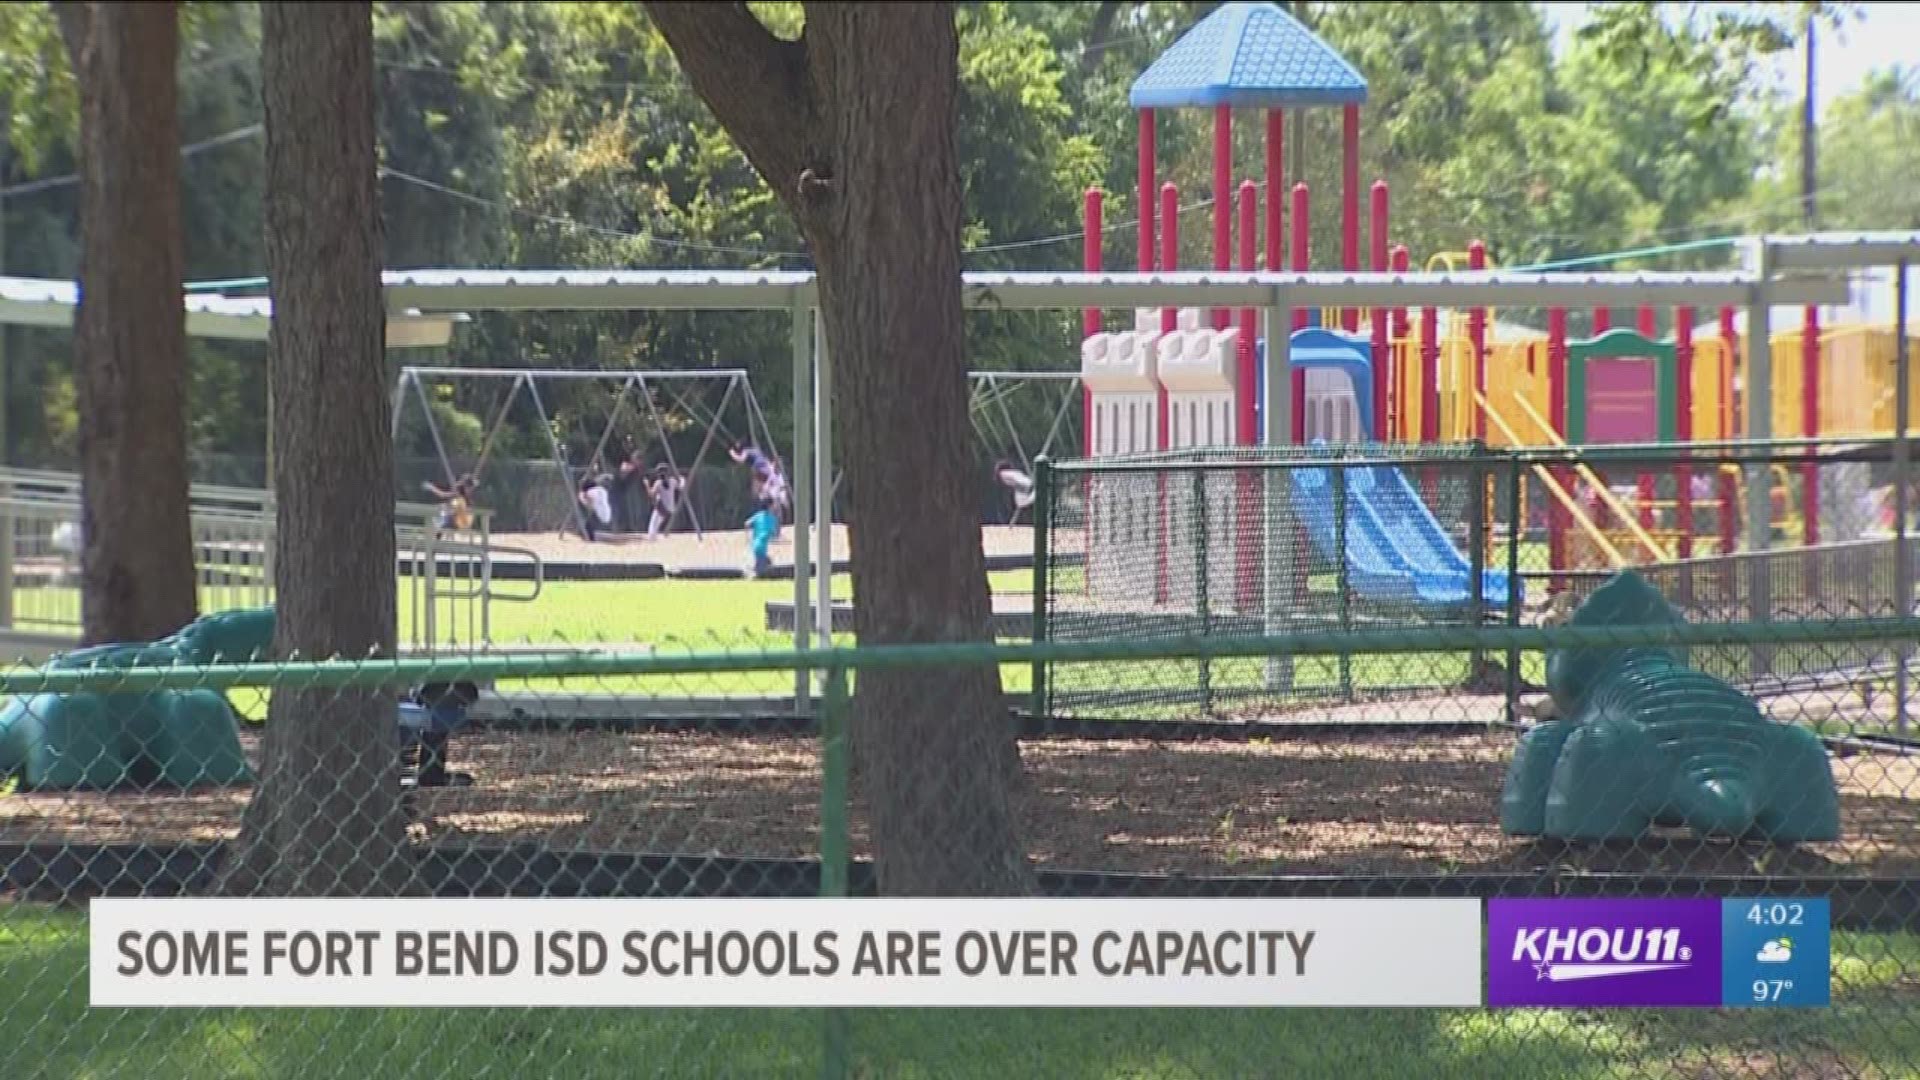 Fort Bend County is one of the fastest growing counties in the country and a growing list of schools in the county are over capacity.